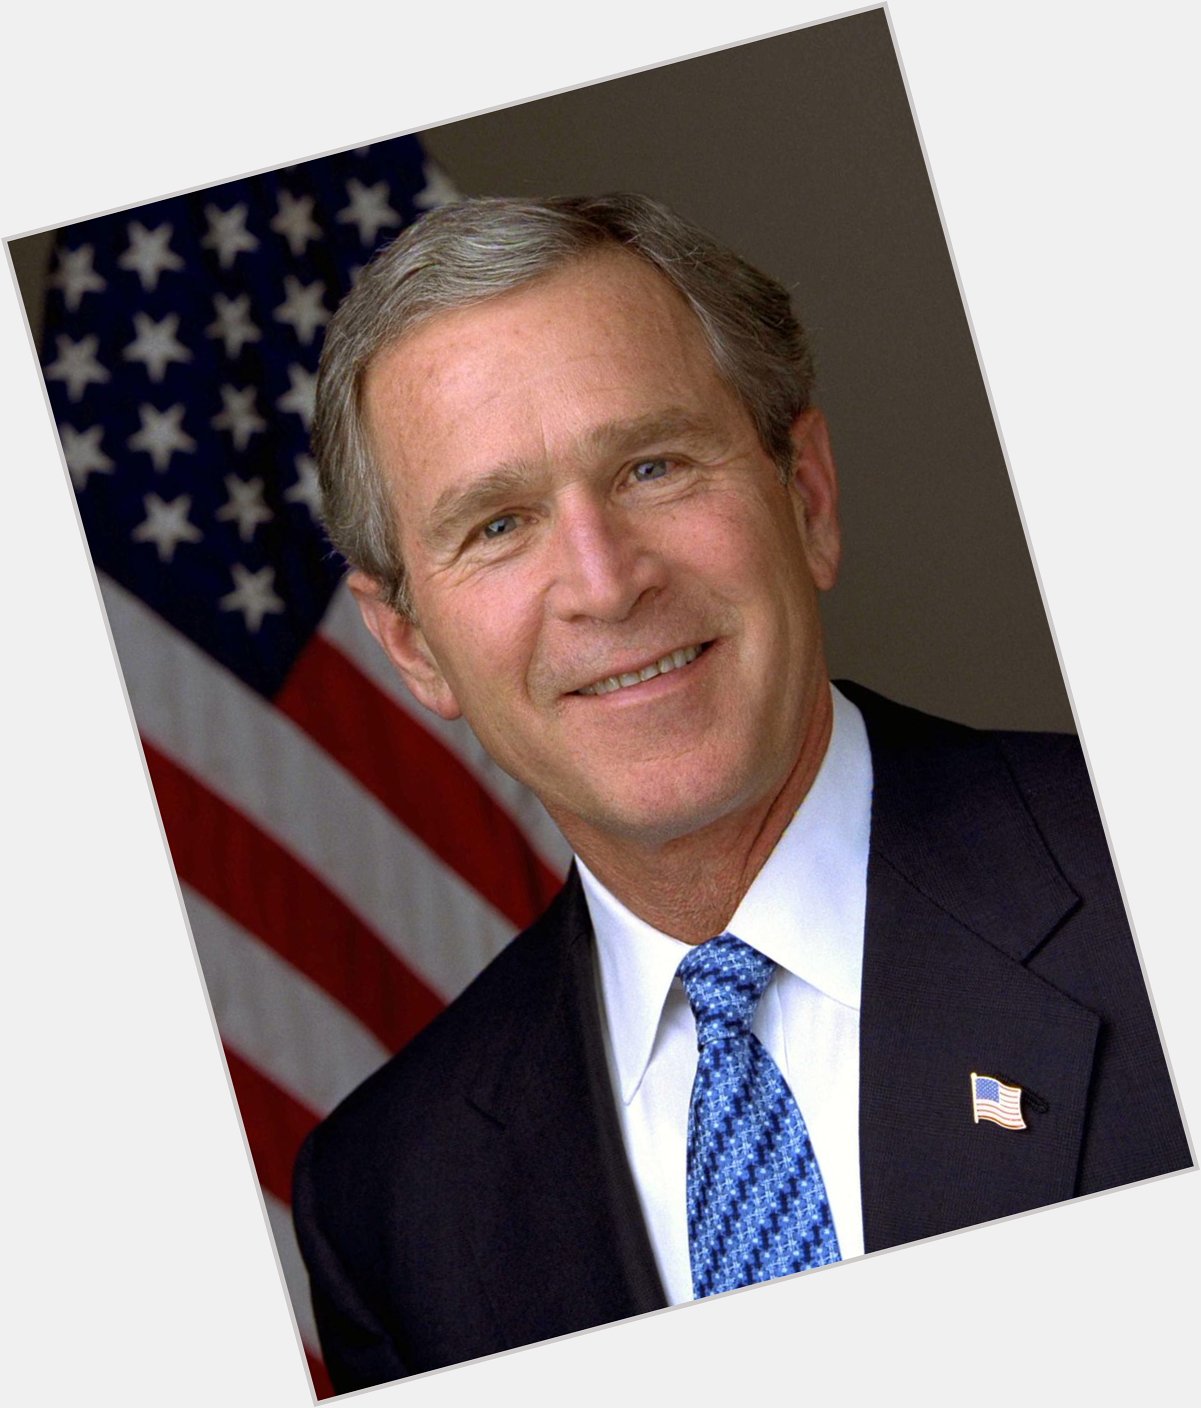 Happy Birthday to the 43rd President of the United States Mr. George W. Bush! 